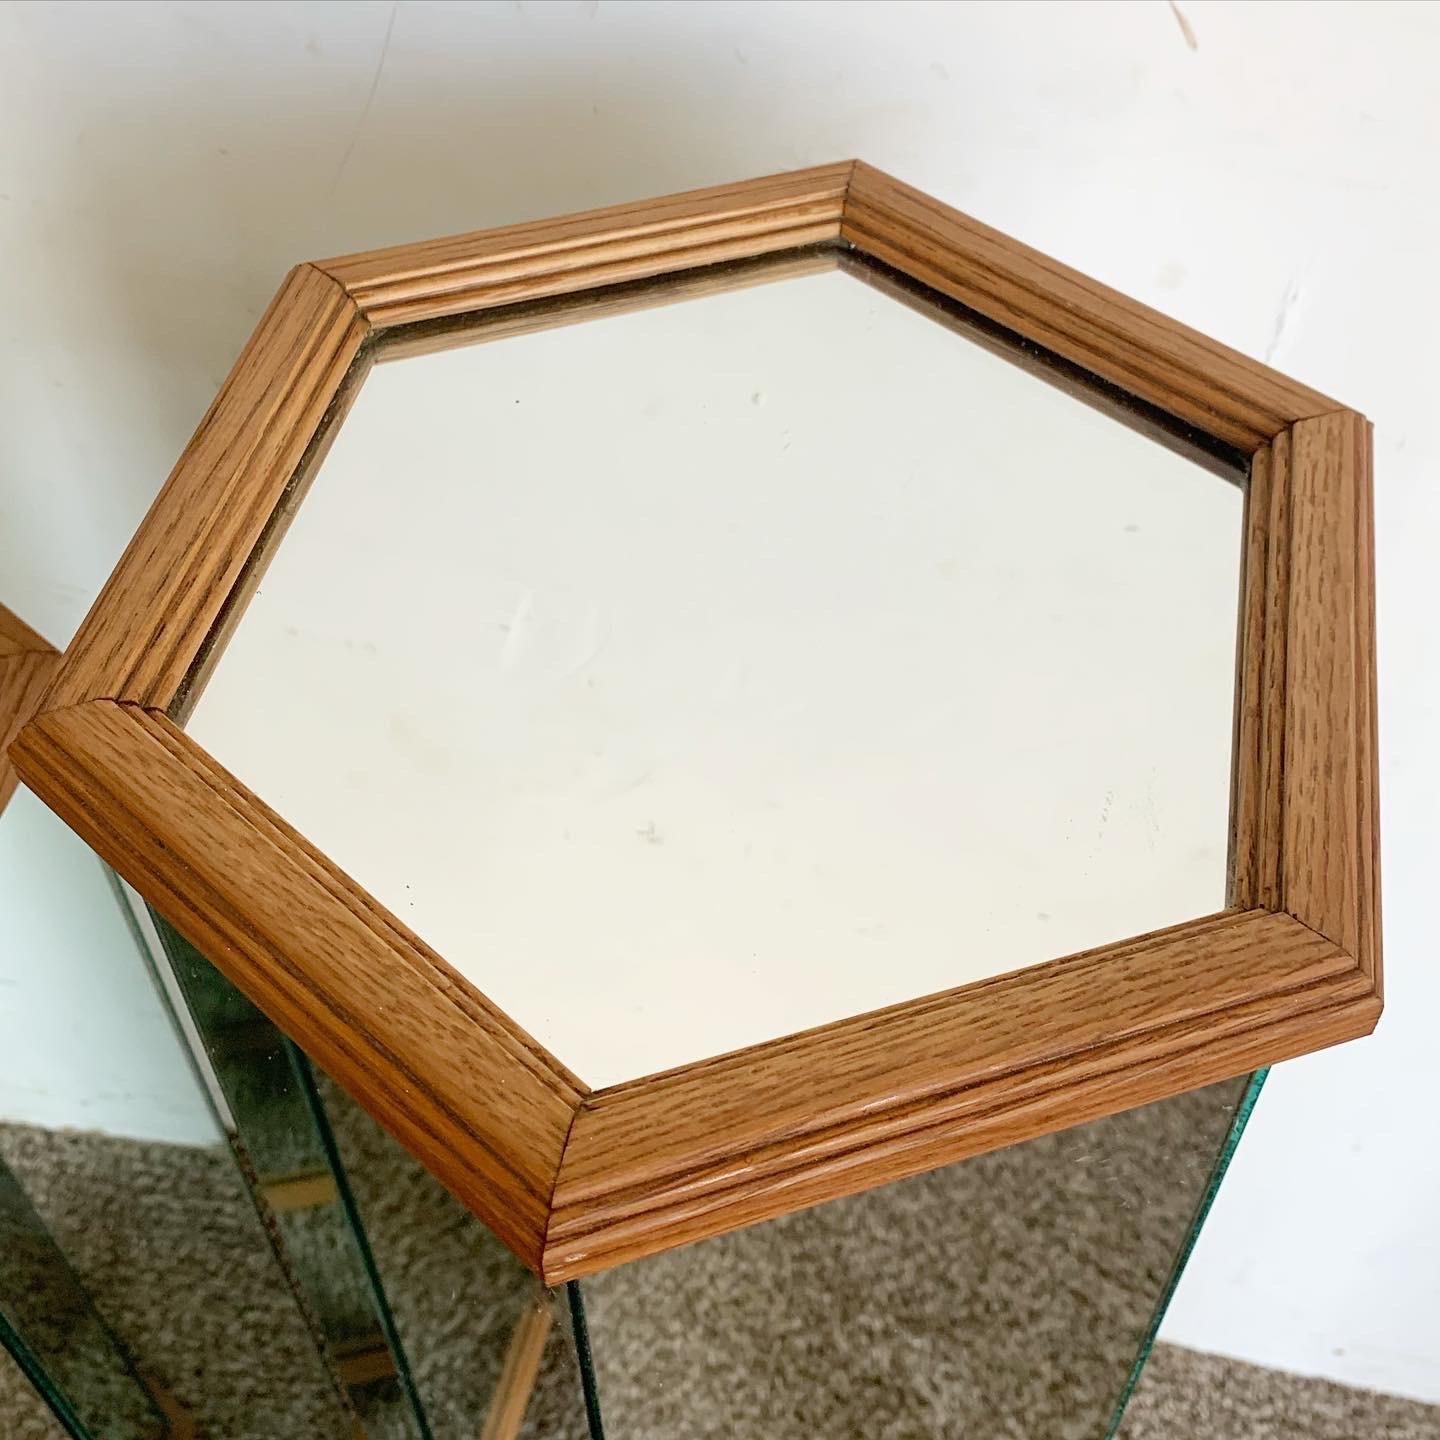 Late 20th Century Postmodern Mirrored Hexagonal Wooden Framed Pedestal Side Tables - a Pair